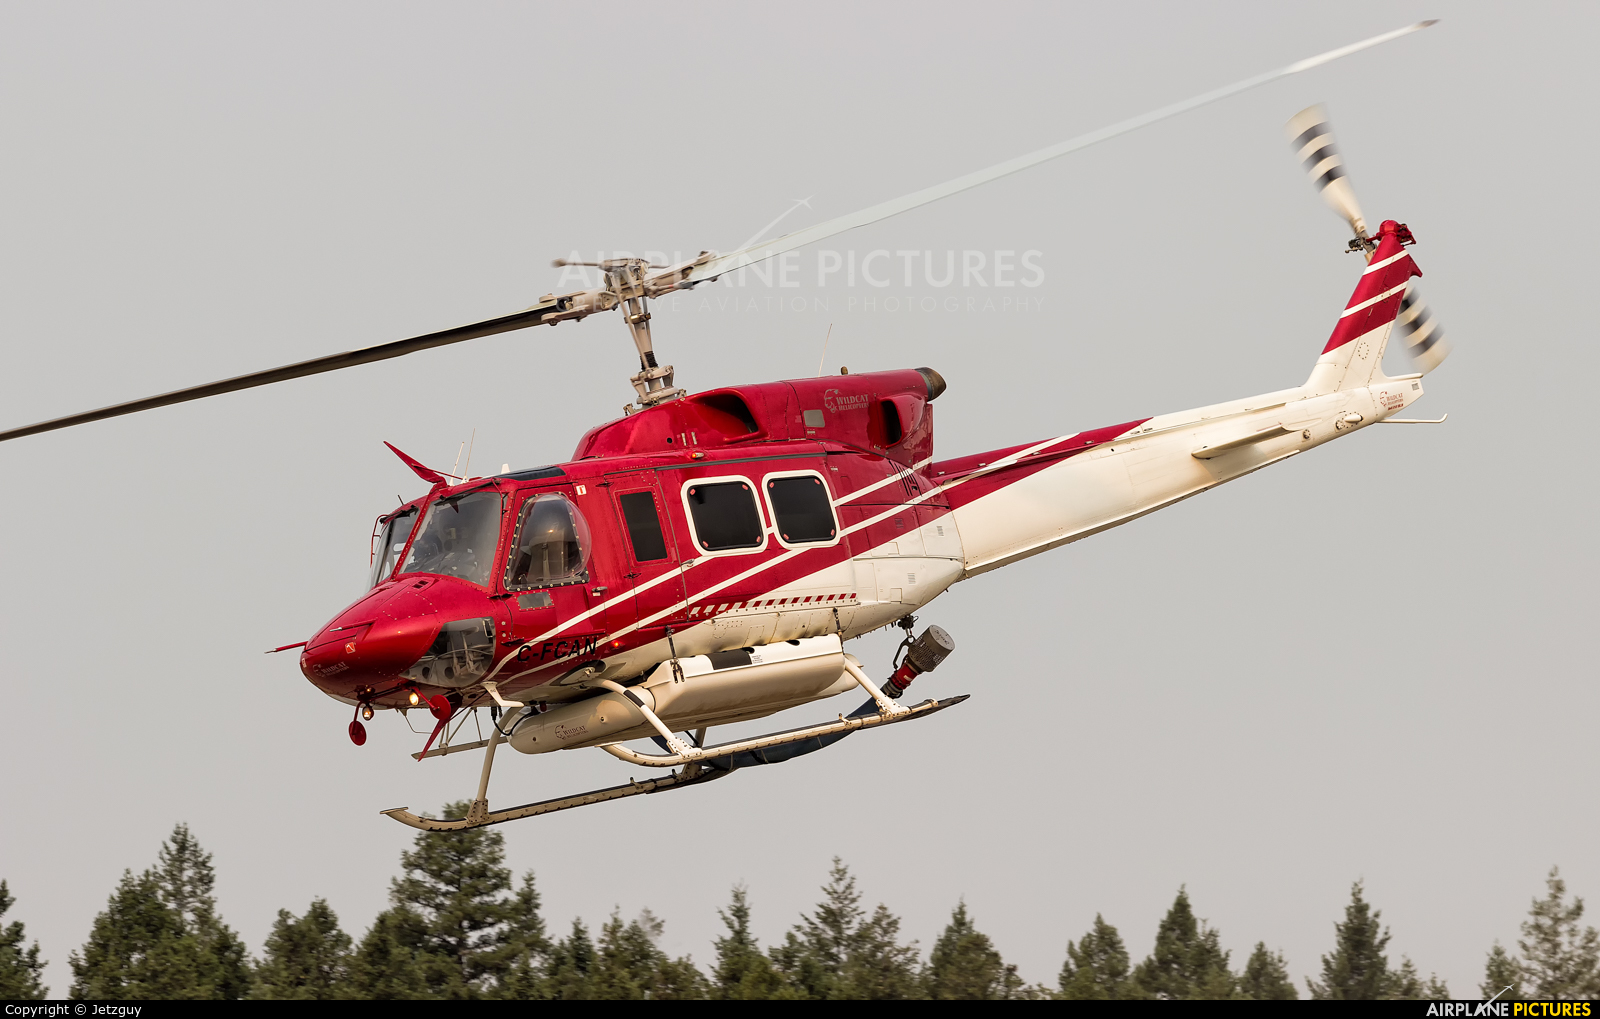 Wildcat Helicopters C-FCAN aircraft at 108 Mile Ranch, BC